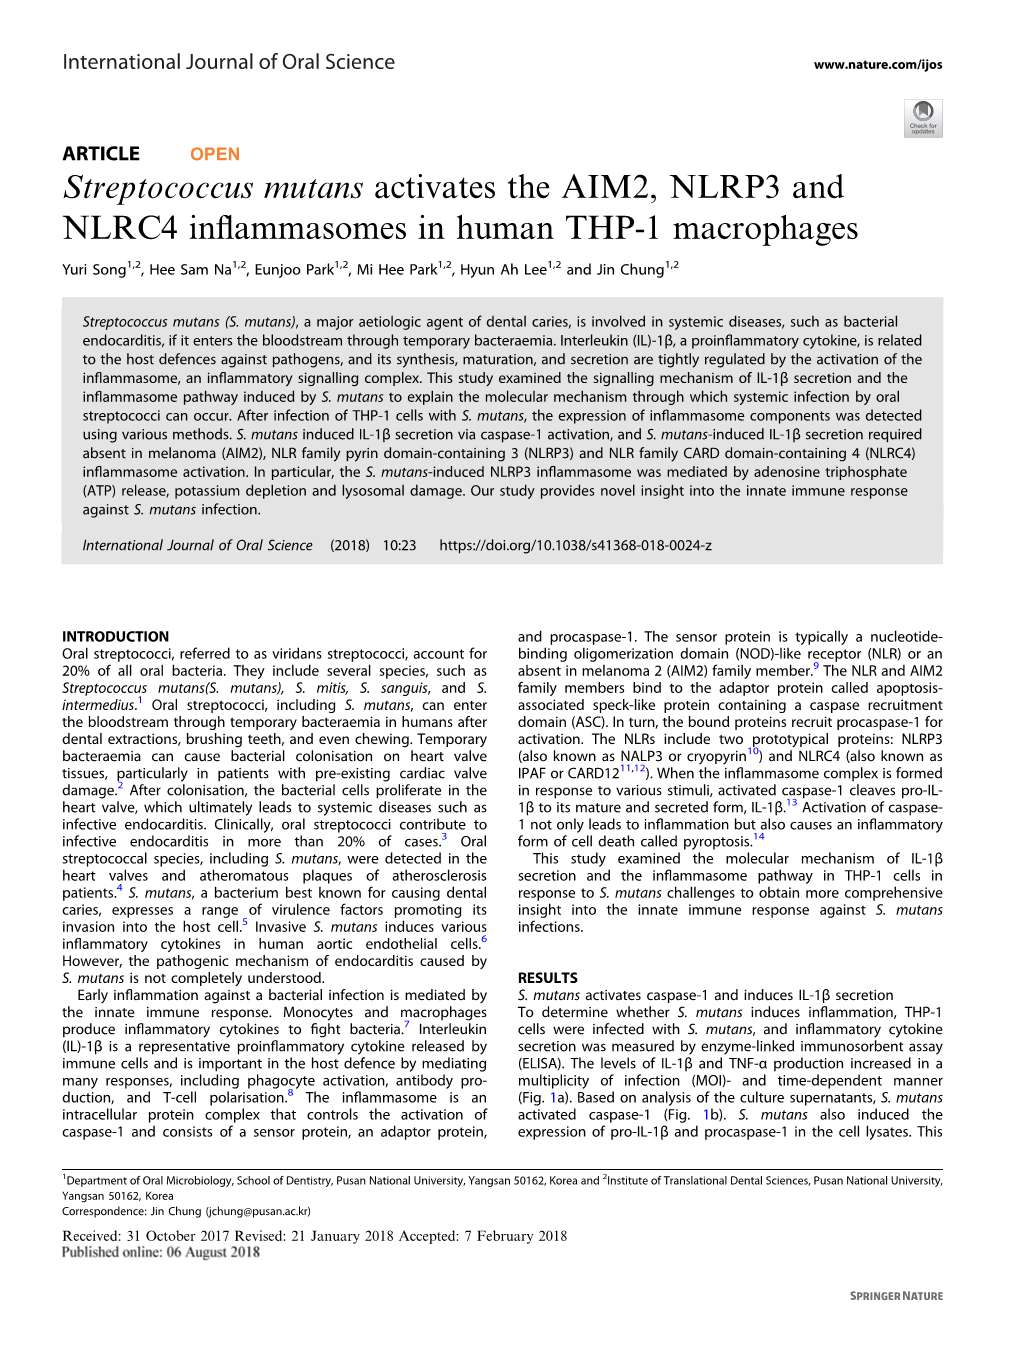 Streptococcus Mutans Activates the AIM2, NLRP3 and NLRC4 Inﬂammasomes in Human THP-1 Macrophages